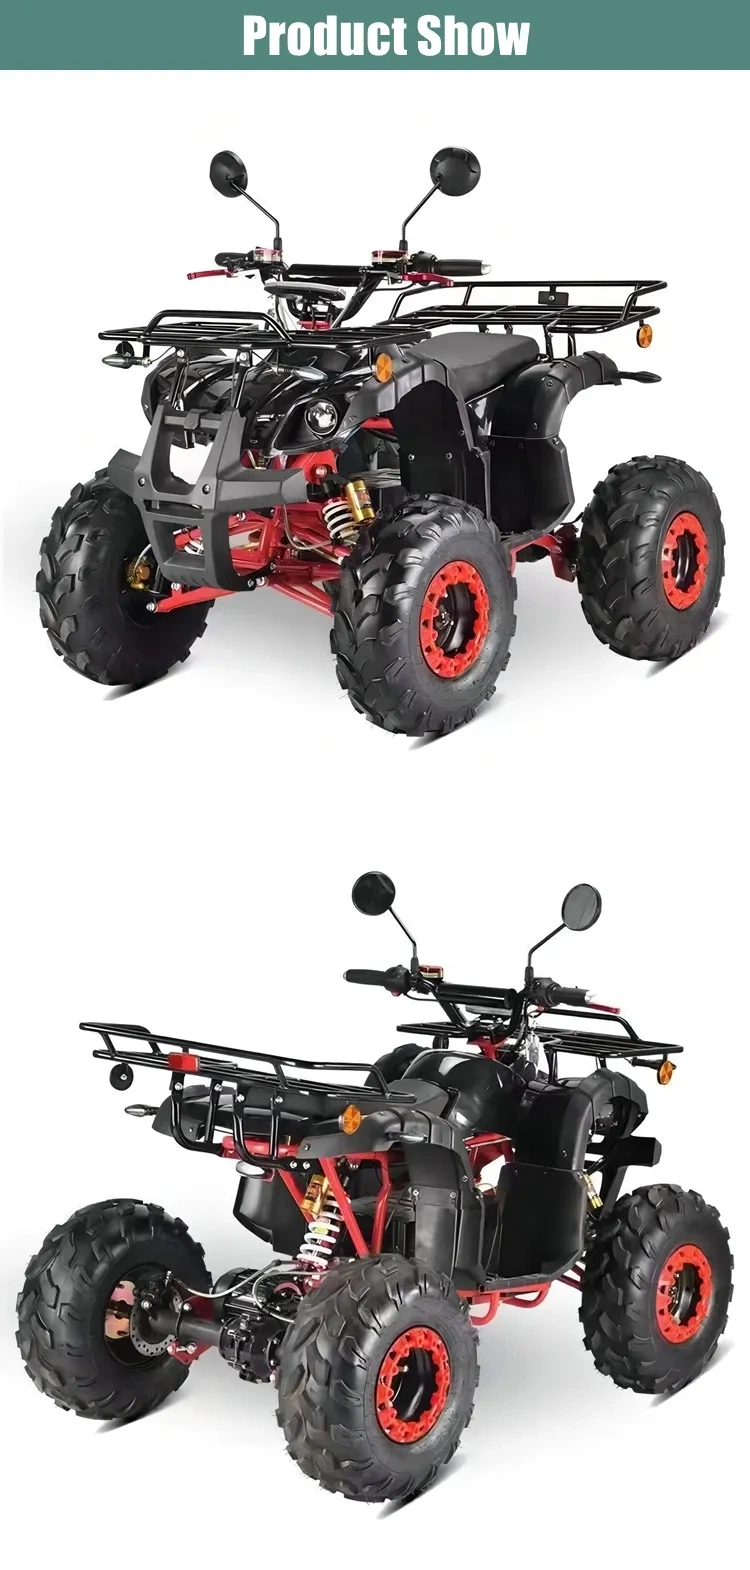 China Import 2000W Powered Shaft Drive 4 Wheeler off Road Quad Bike Buggy 4X4 4 Wheeler Electric ATV for Adults